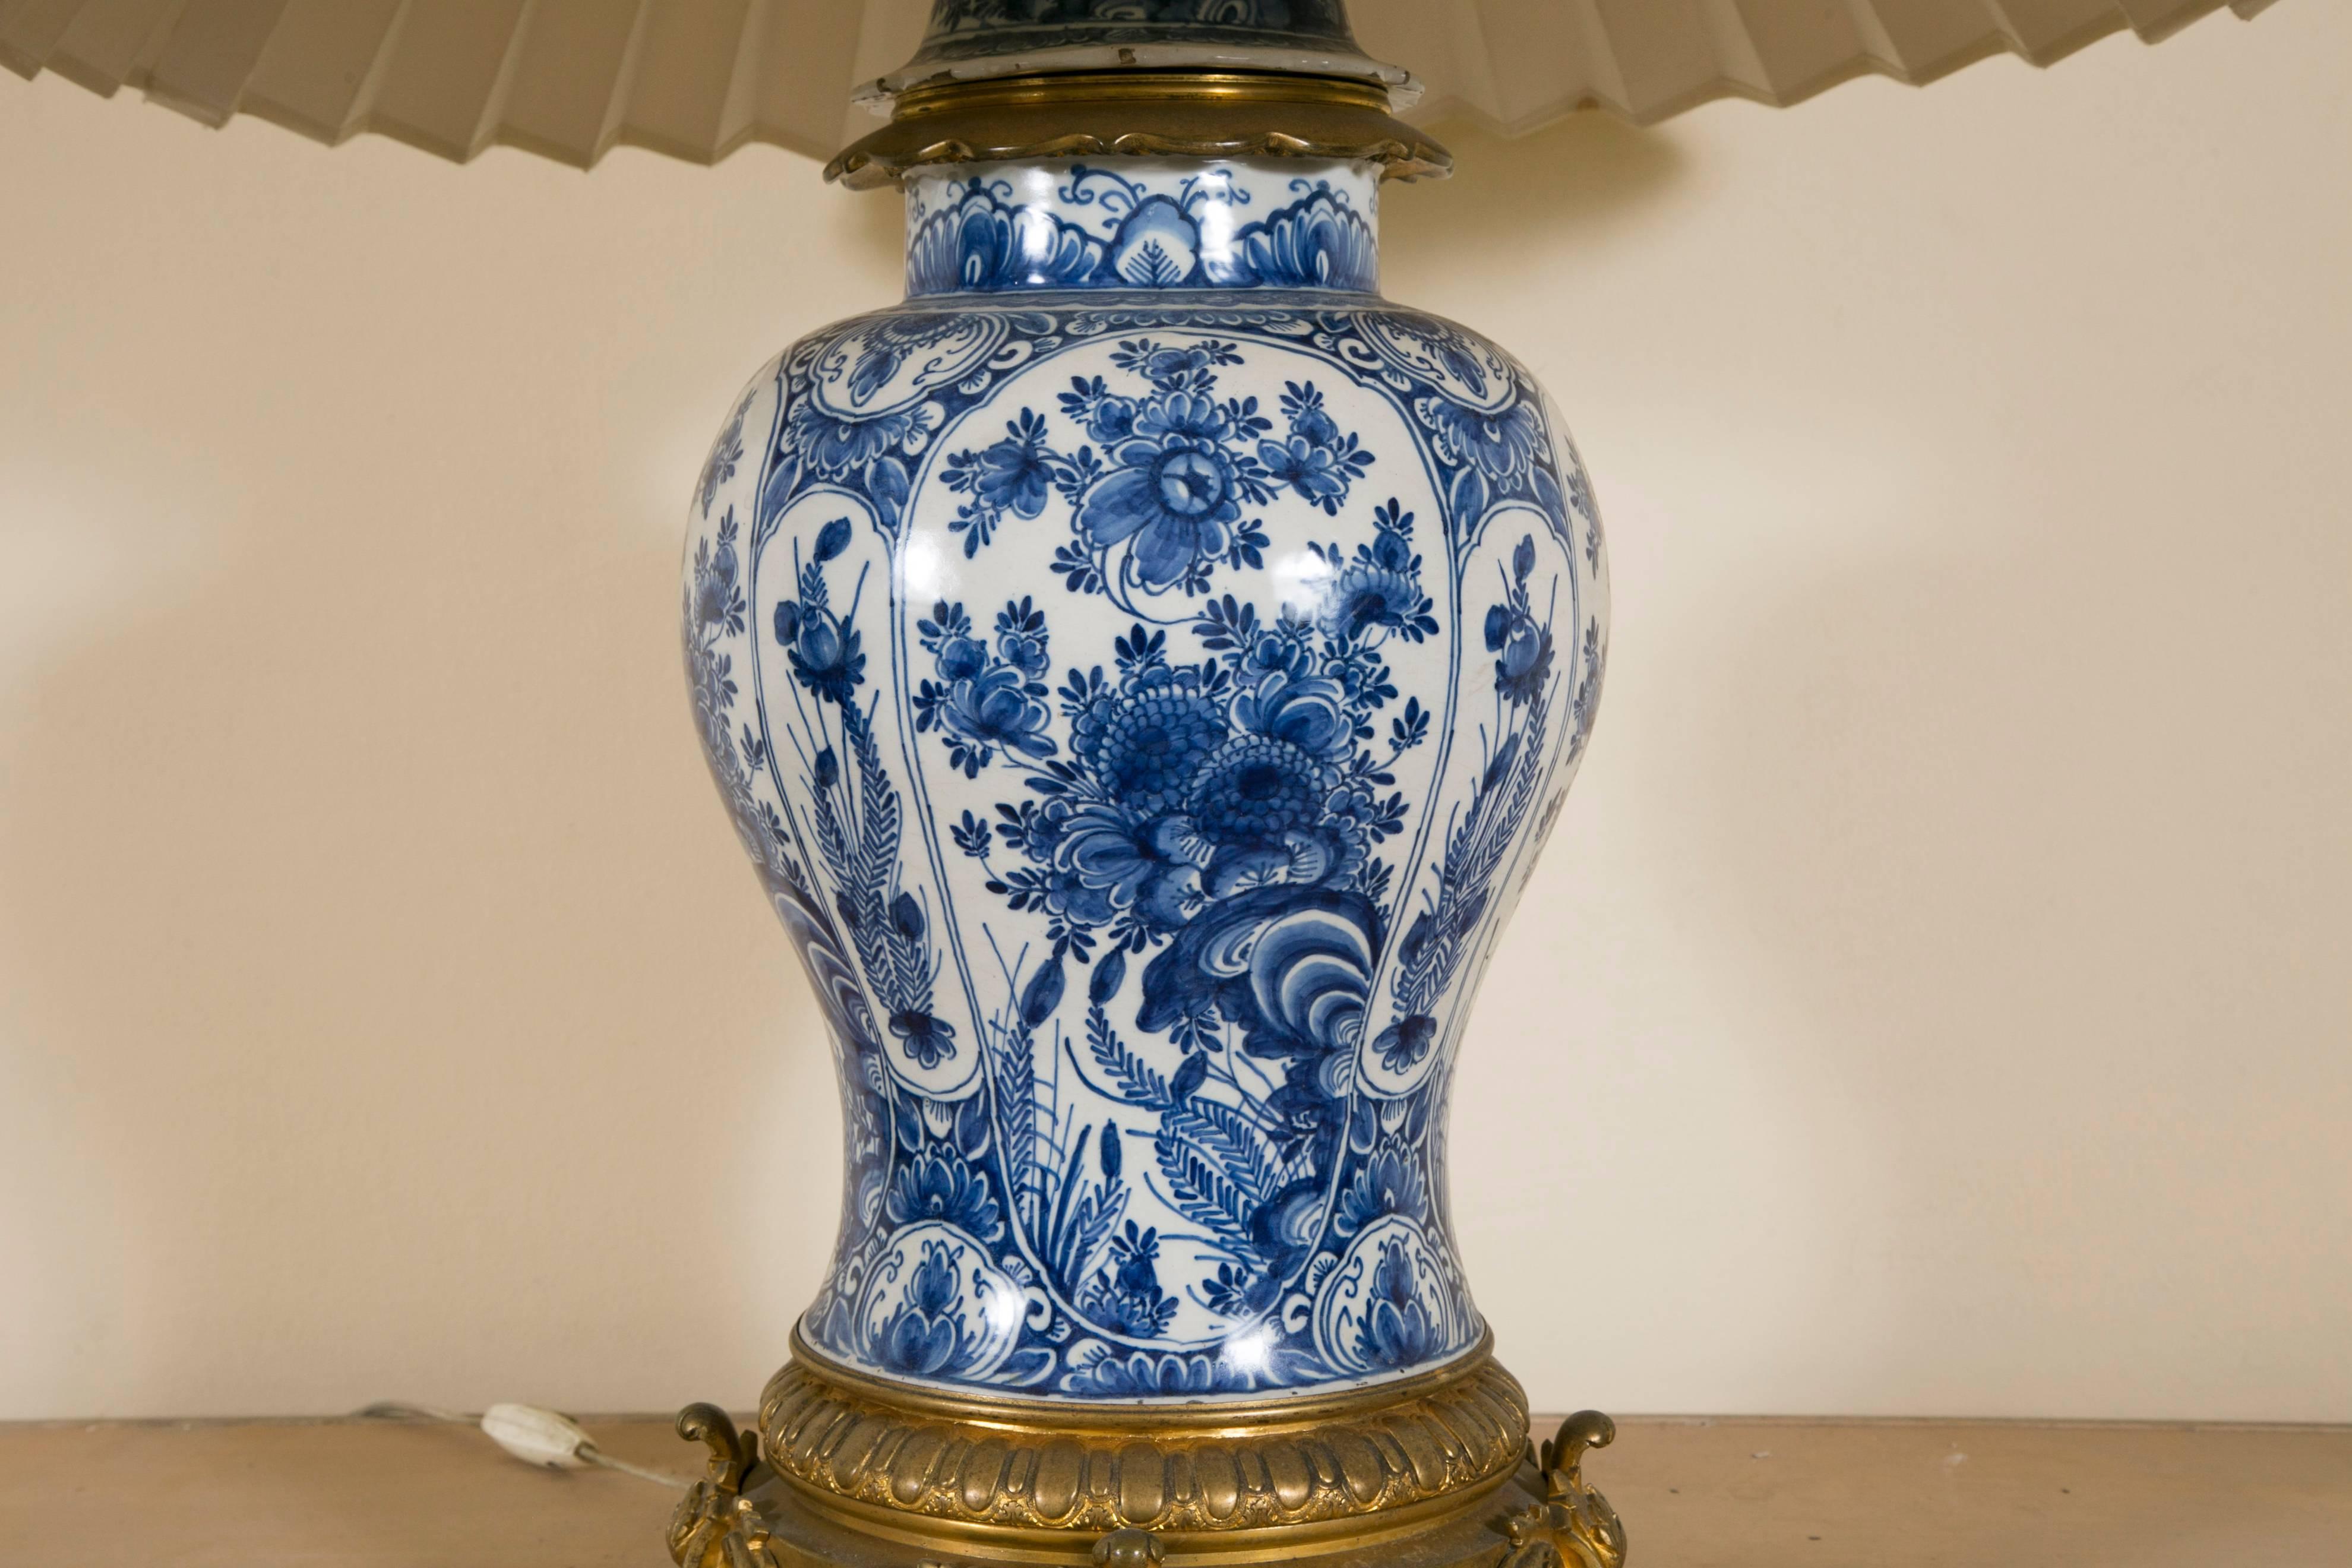 Blue Delft vase with a nice and rich flowers decor lamp mounted on a gilt bronze base and top, 19th century
Wired to the UE standard
Worn fabric lampshade available free
Shade sizes H 74 cm, D 60 cm.